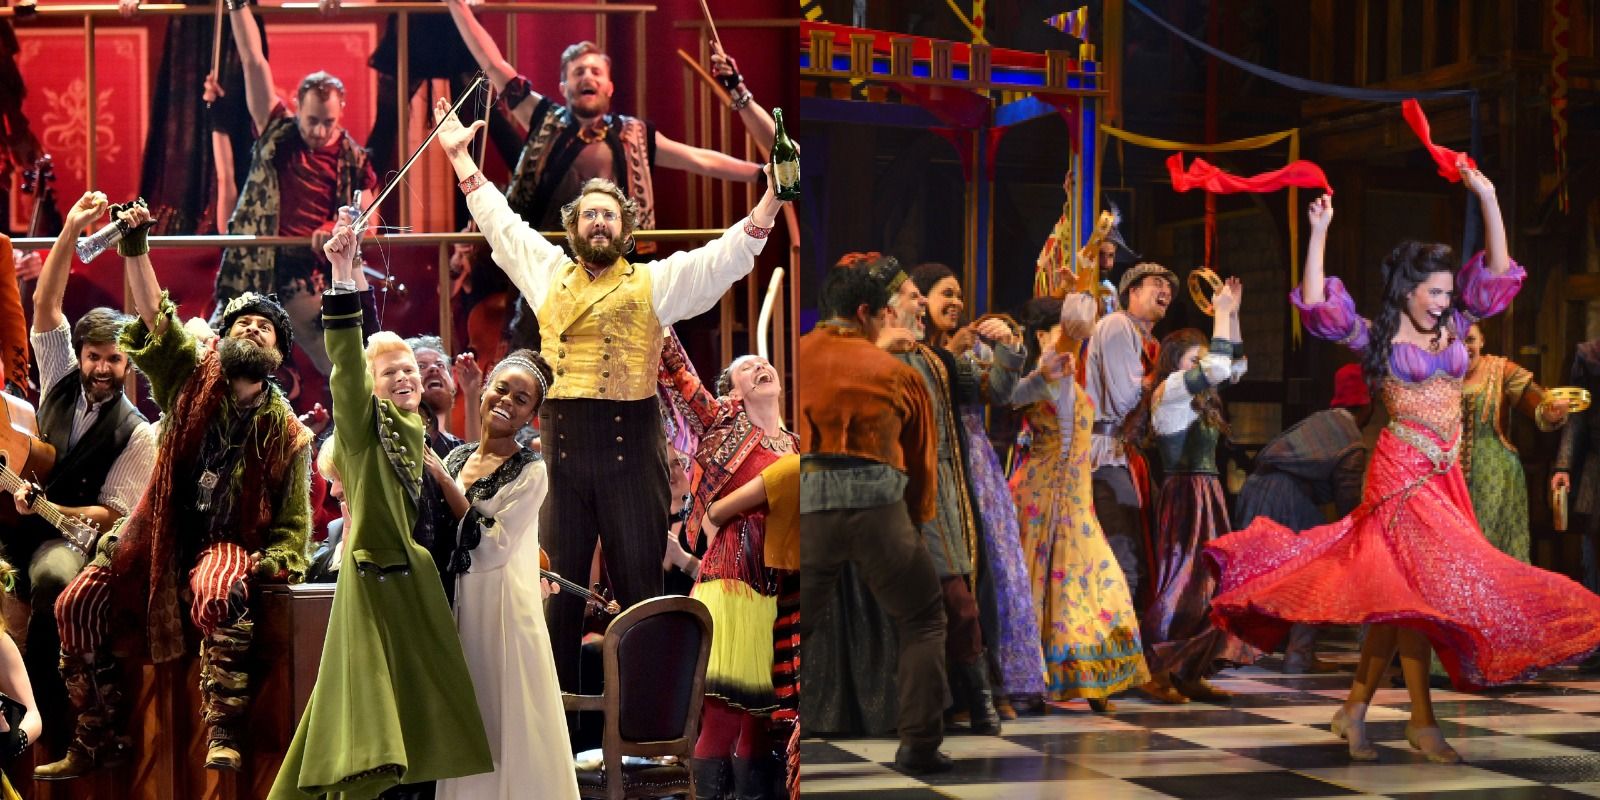 The cast of Natasha, Pierre, and the Great Comet of 1812 split with the cast of The Hunchback of Notre Dame.